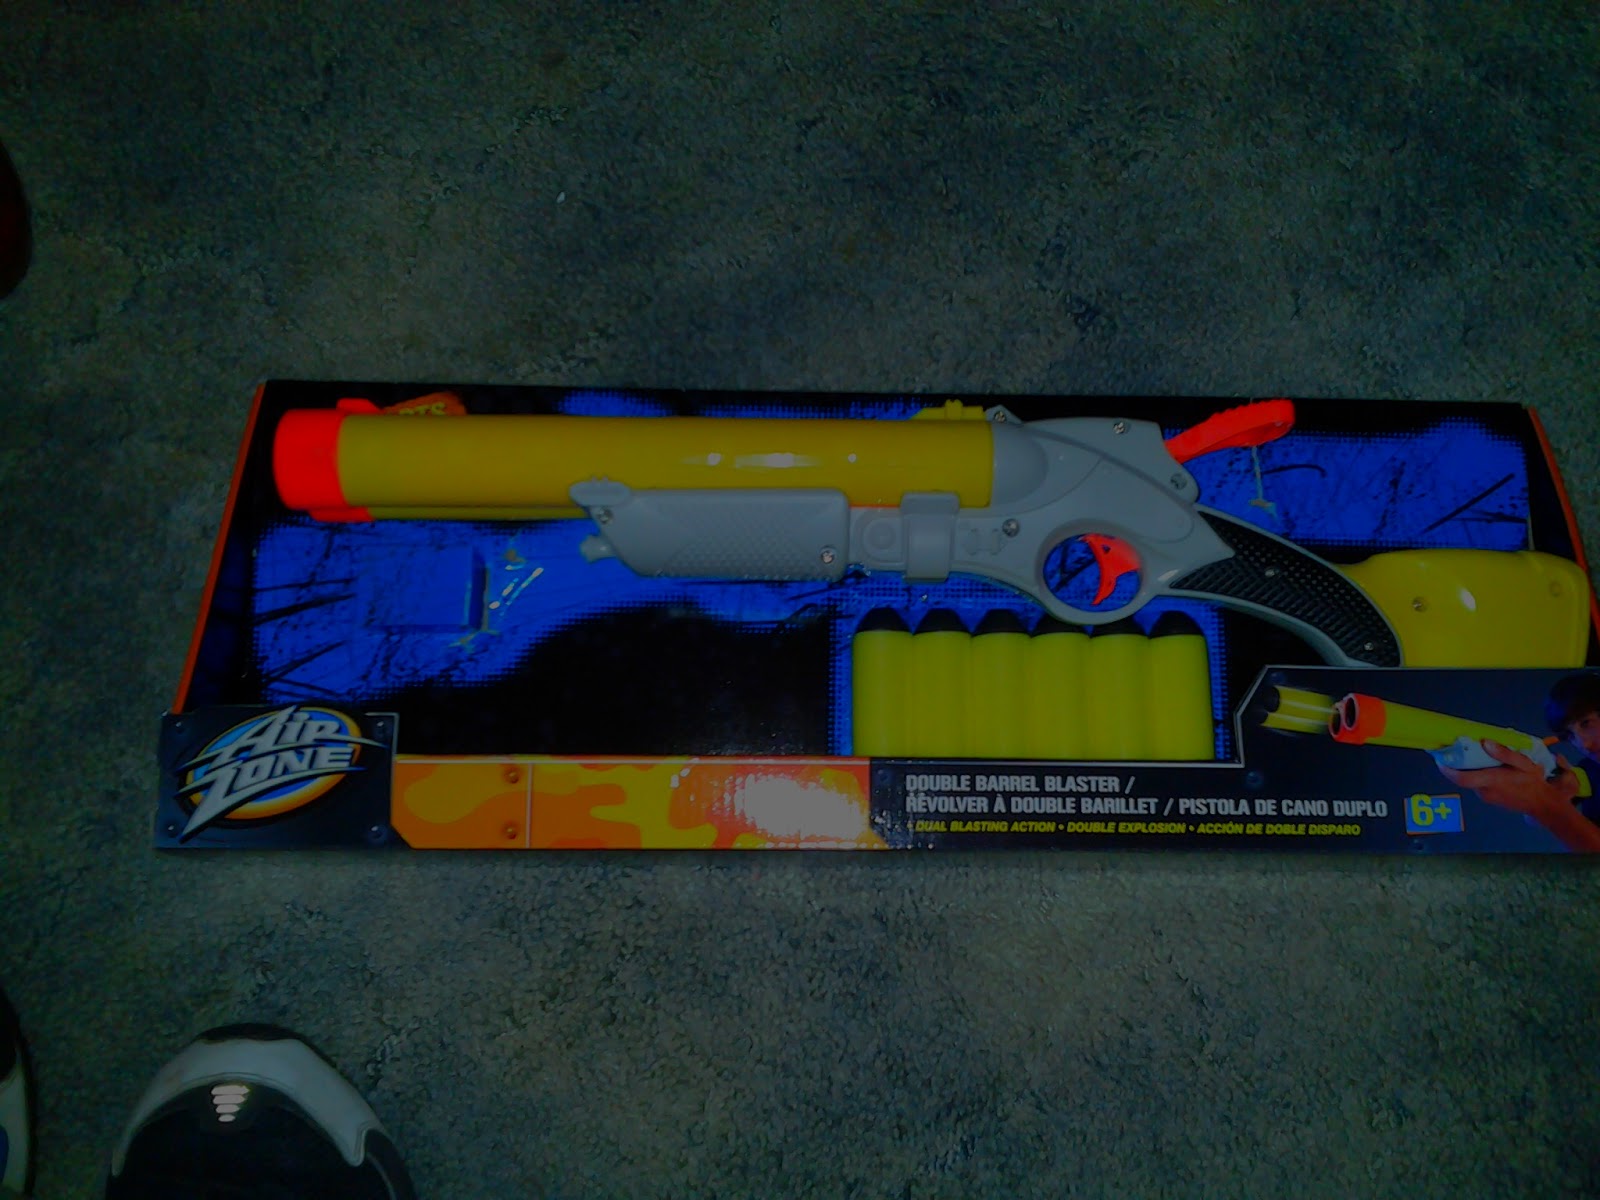 Anonym nægte Humoristisk Buffdaddy Nerf: Air Zone Double Barrel Blaster Review